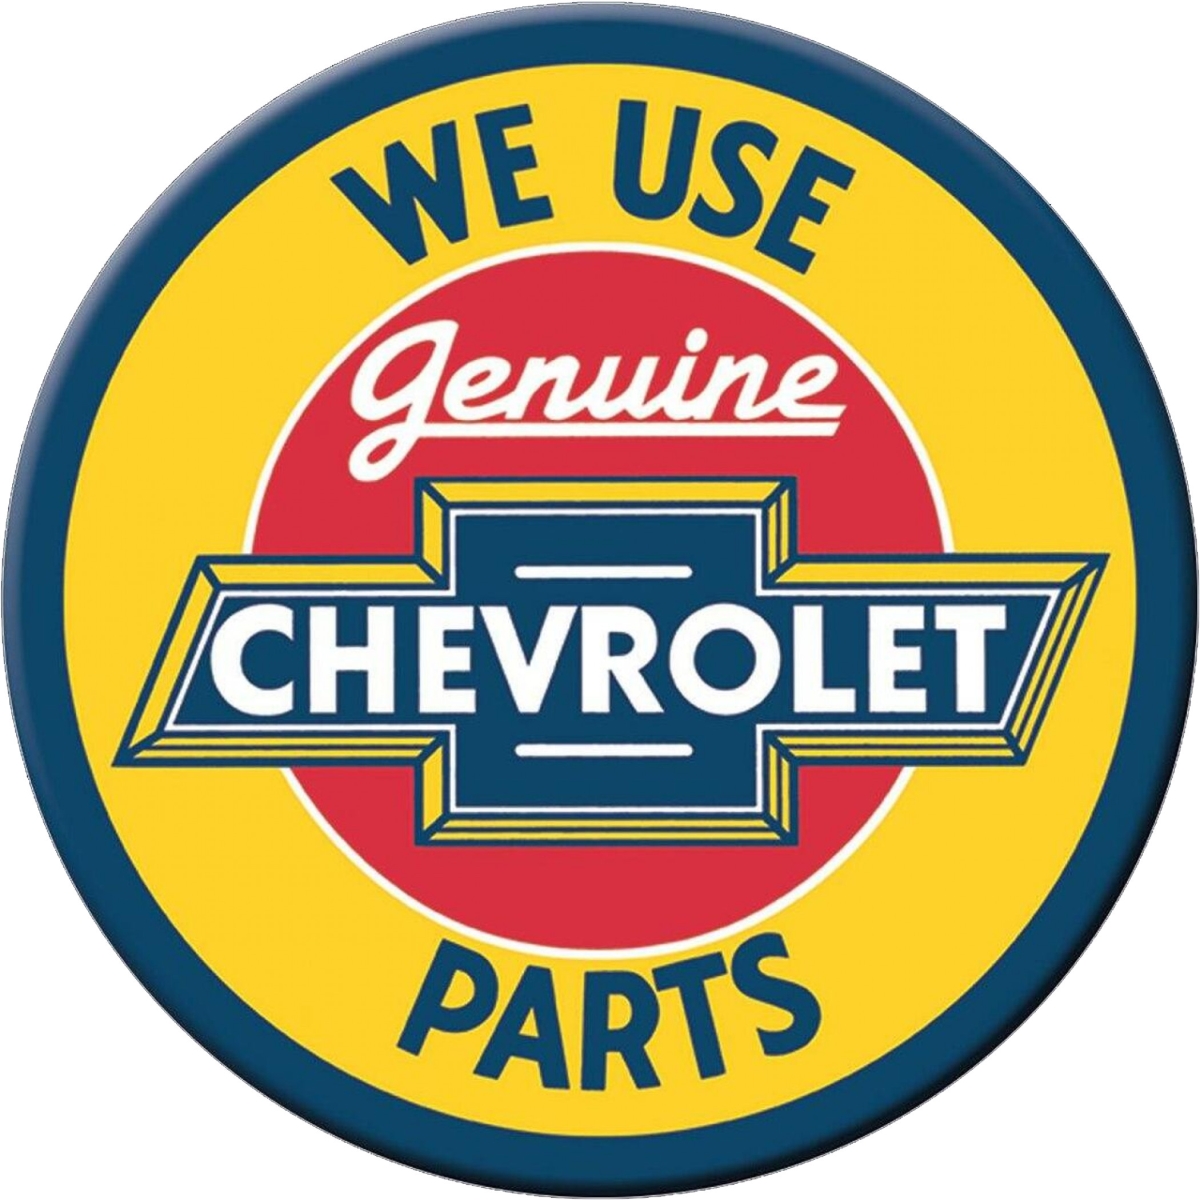 Standalone We Use Genuine Chevrolet Parts Retro Style Magnet